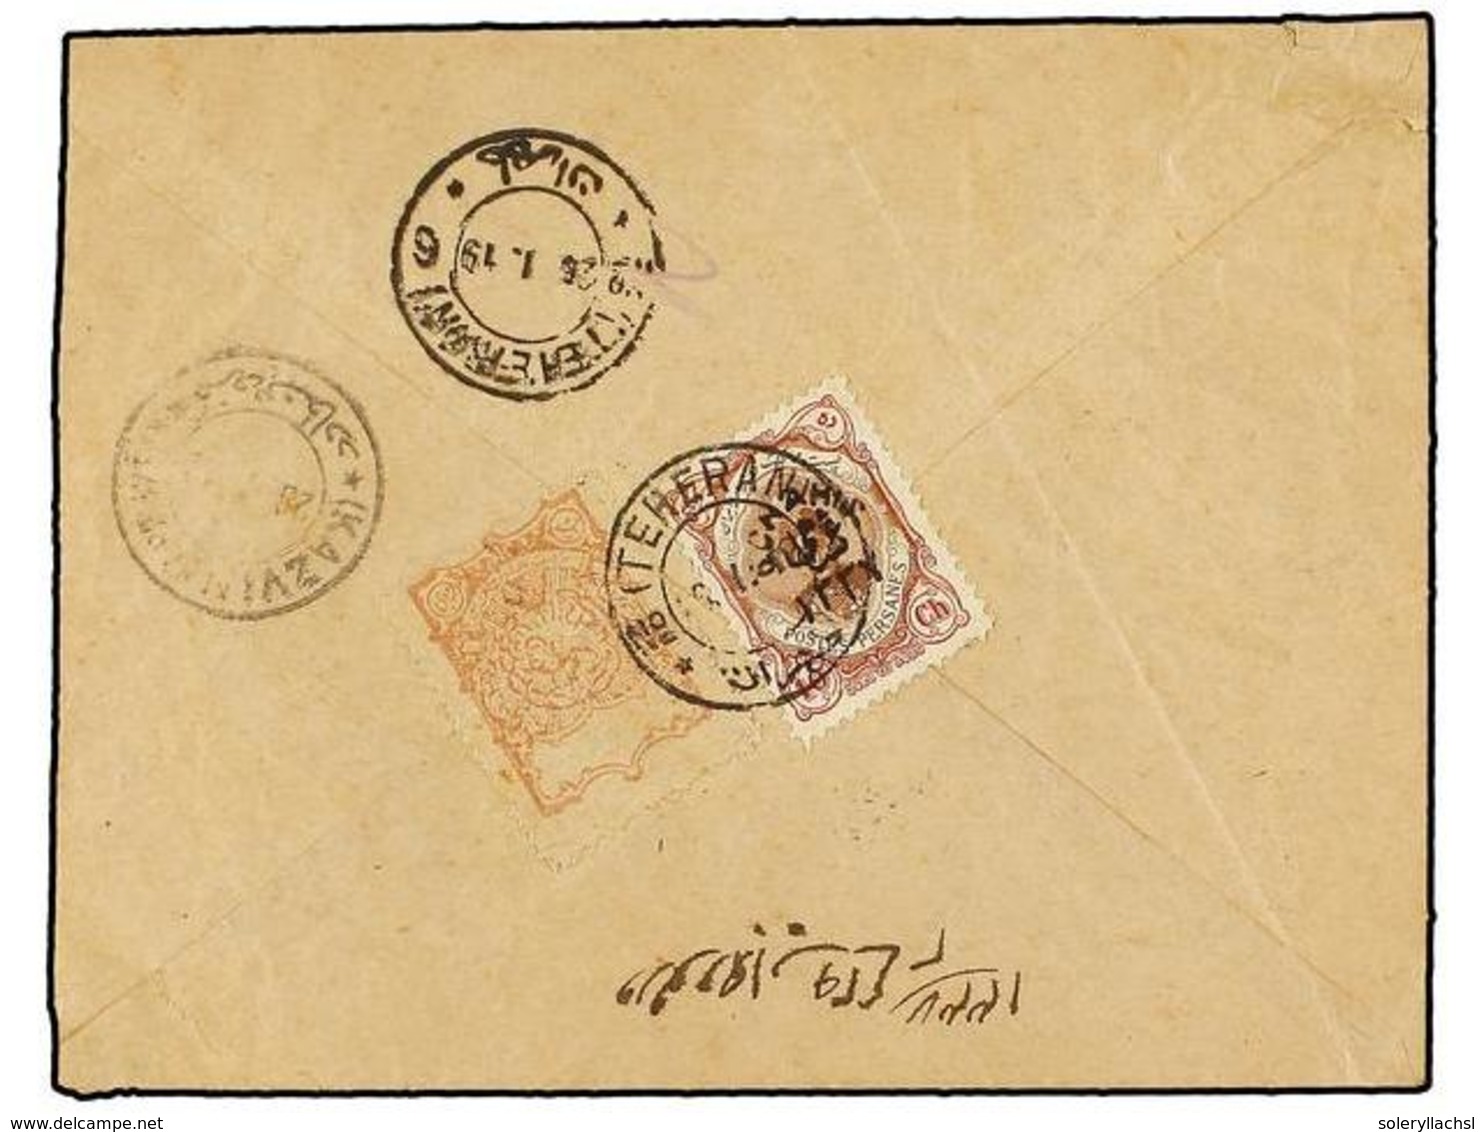 IRAN. Sc.608. 1919. TEHERAN To KAZVIN. 6 Ch. On 10 Ch. And FAMINE RELIEF STAMPS Of 1 Ch. Red. Rare On Cover. - Other & Unclassified